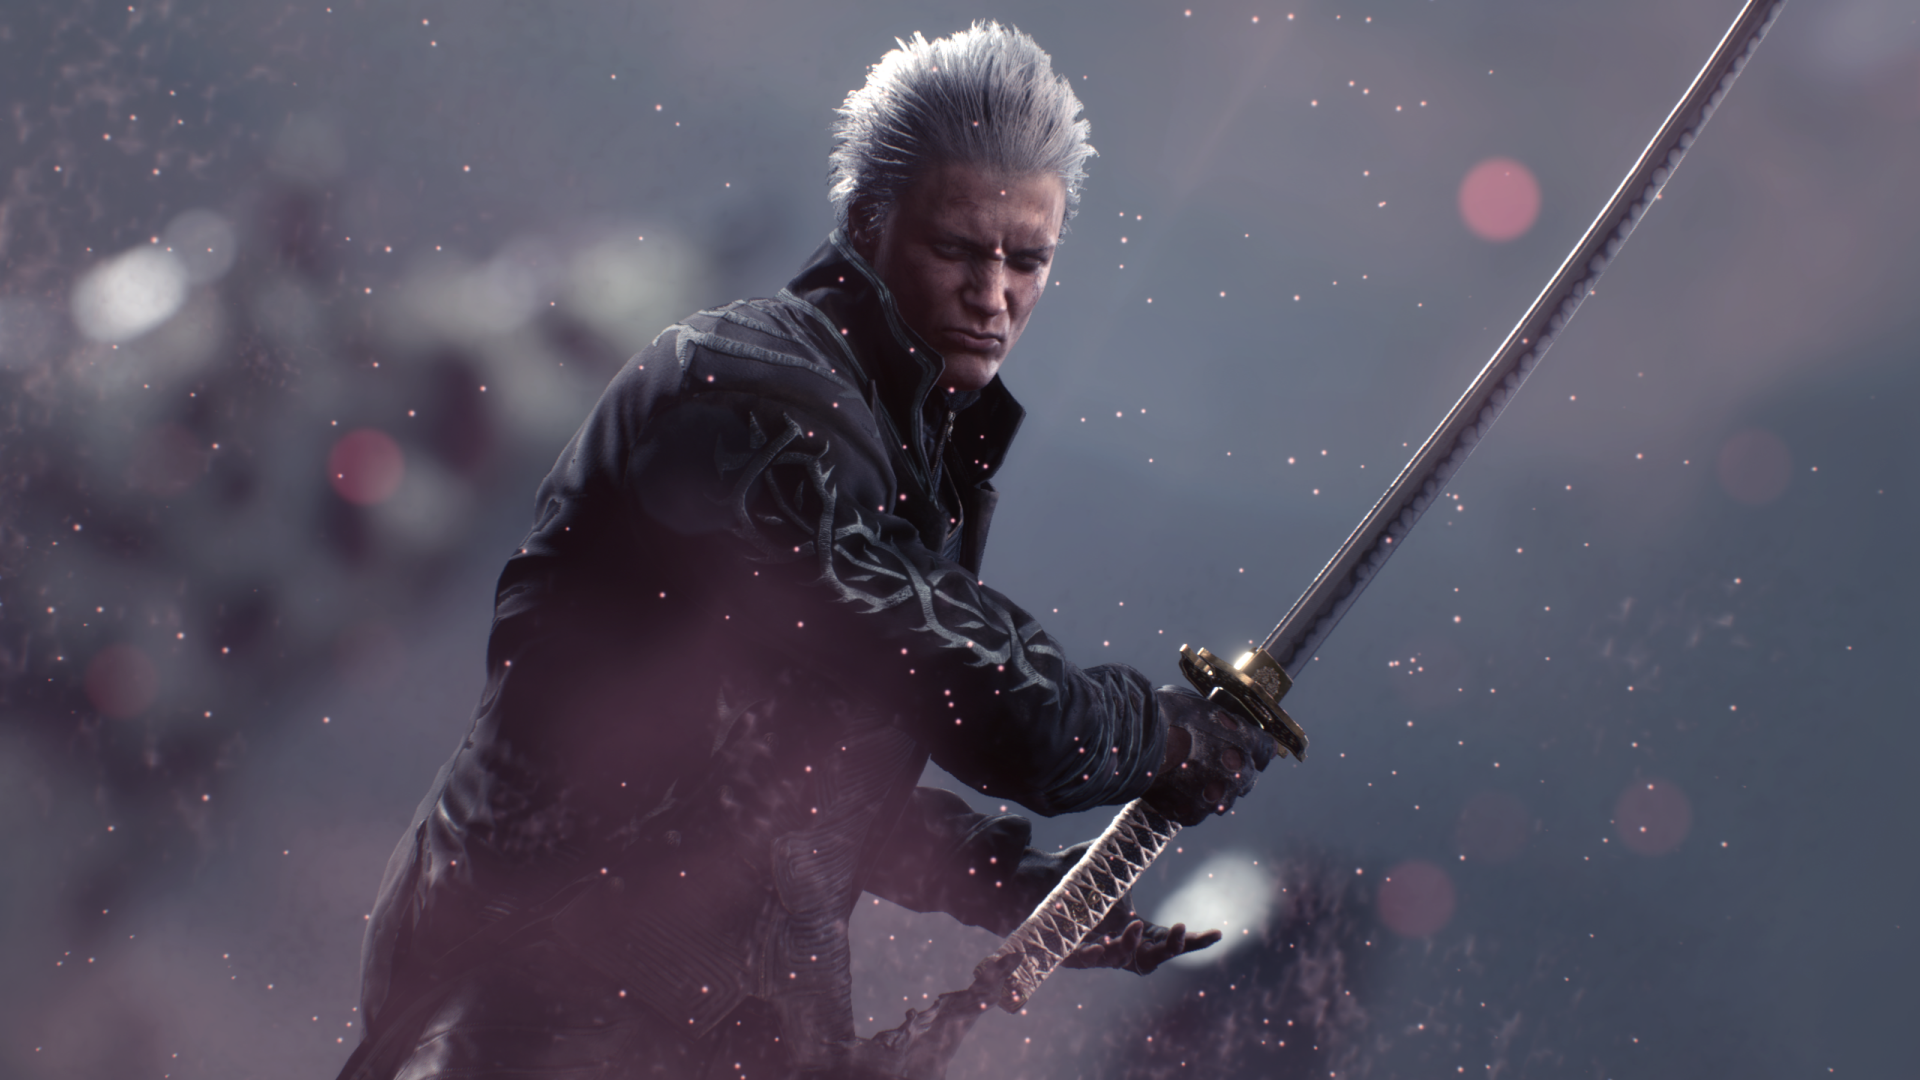 Vergil HD Wallpaper | Background Image | 2560x1440 | ID:1002279 ... Vergil Devil May Cry 3 Wallpaper